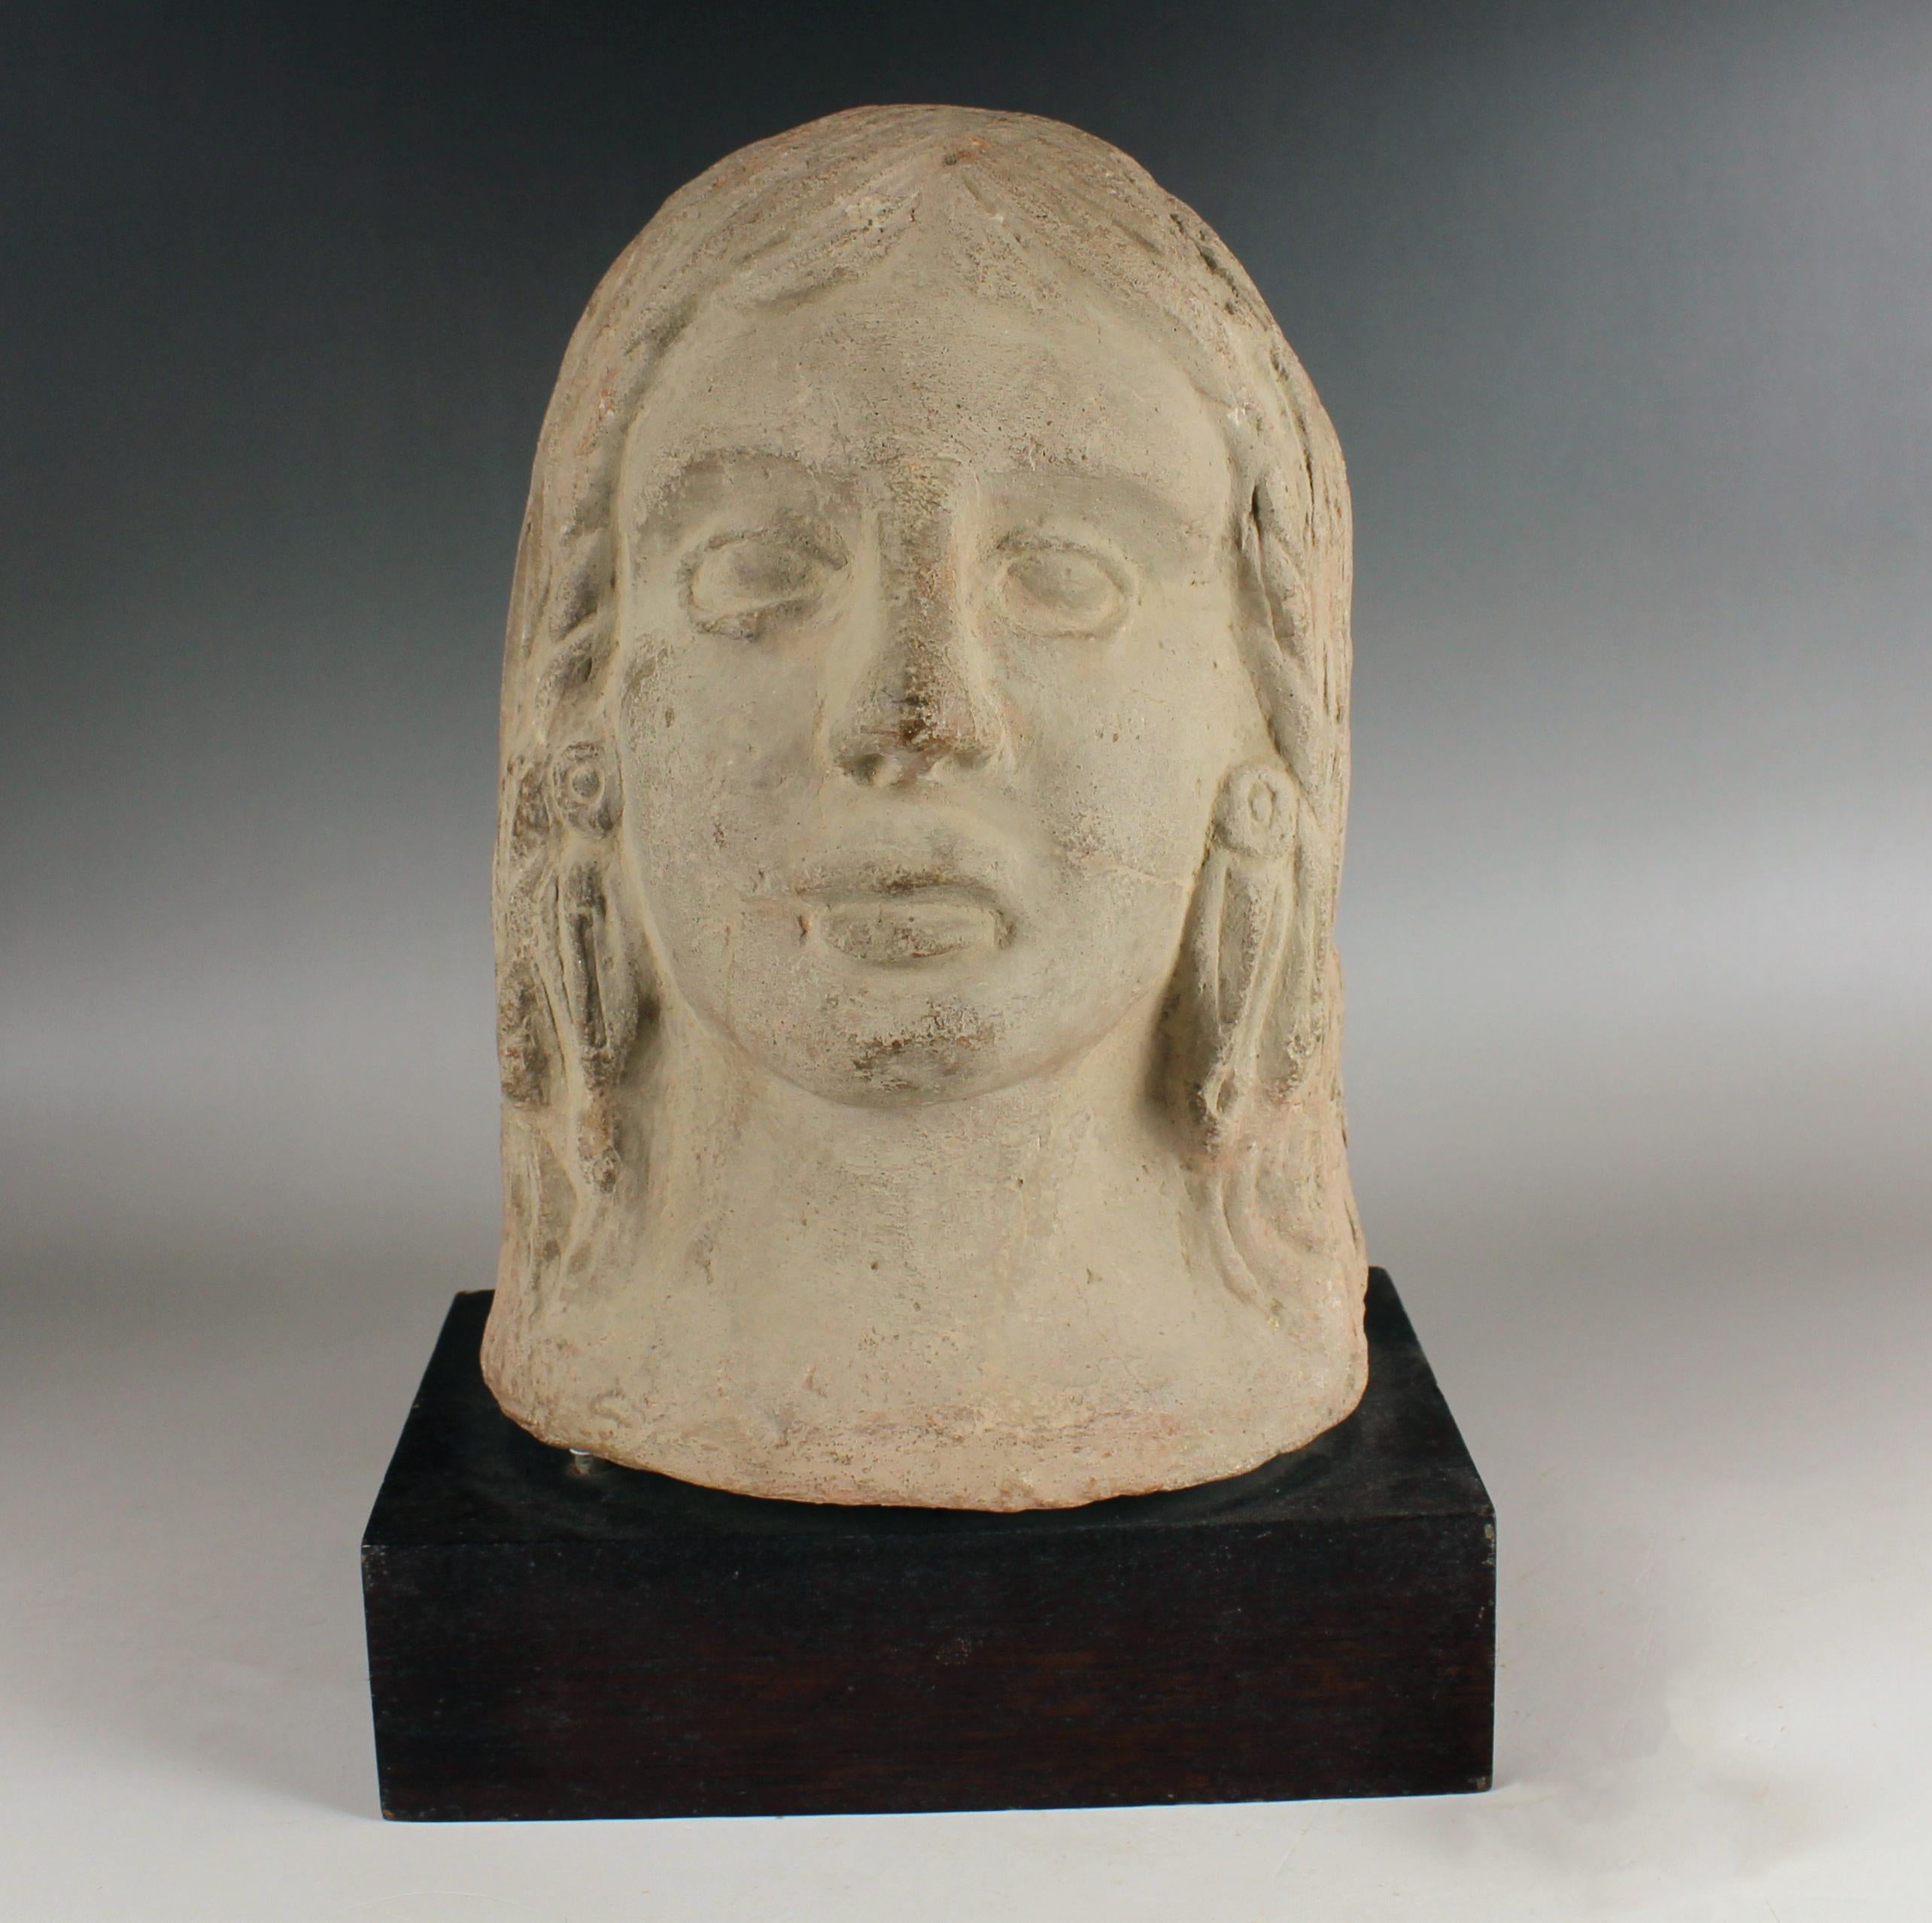 ITEM: Votive head
MATERIAL: Terracotta
CULTURE: Etruscan
PERIOD: 5th – 4th Century B.C
DIMENSIONS: 215 mm x 155 mm x 120 mm (without stand)
CONDITION: Good condition. Includes stand
PROVENANCE: Ex French private collection, E., acquired in Carrefour